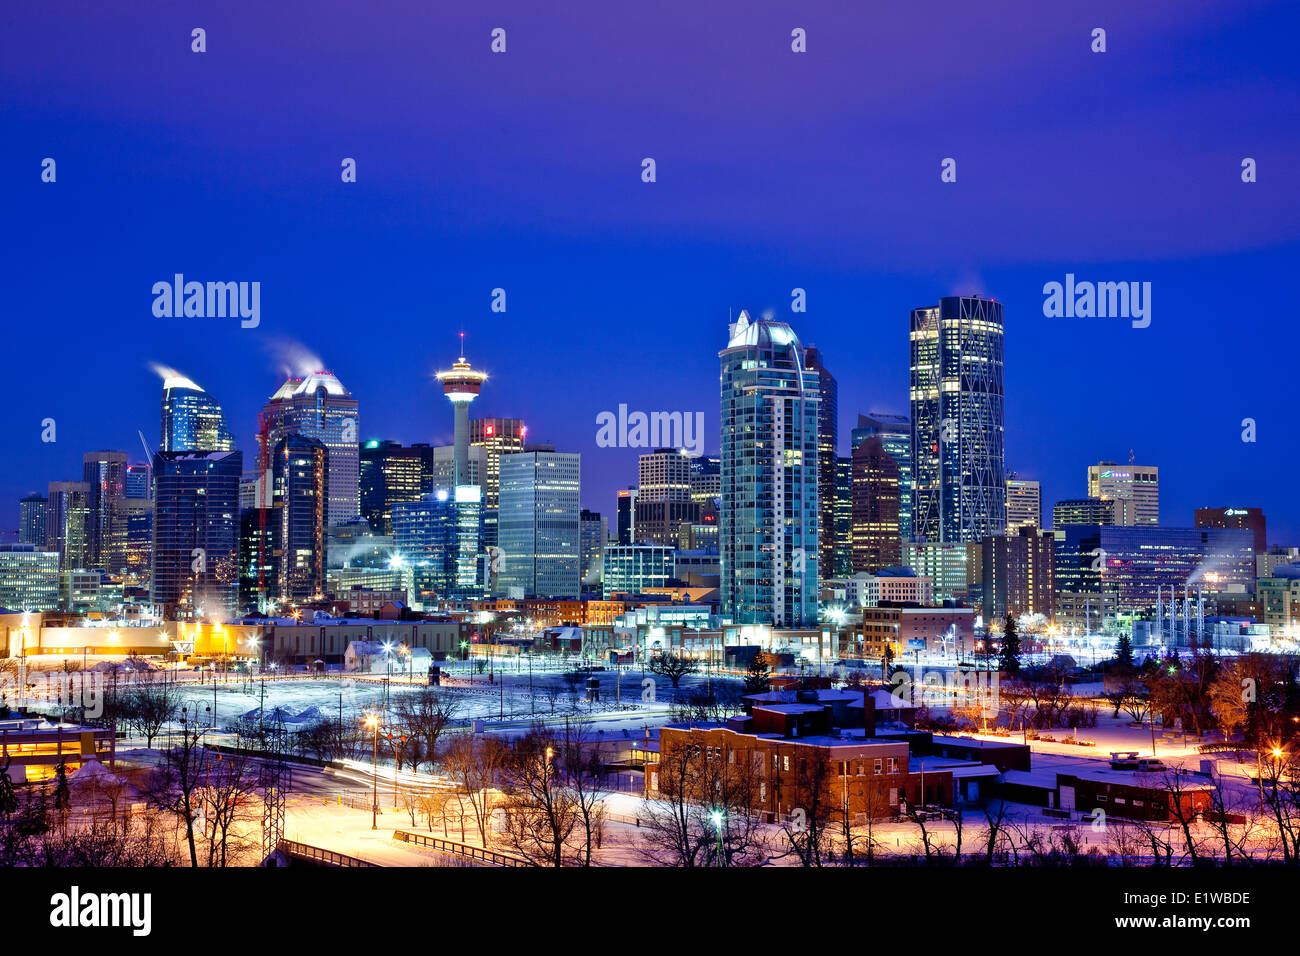 Calgary skyline at night in winter showing office towers including Bow Tower, Calgary, Alberta, Canada. Stock Photo